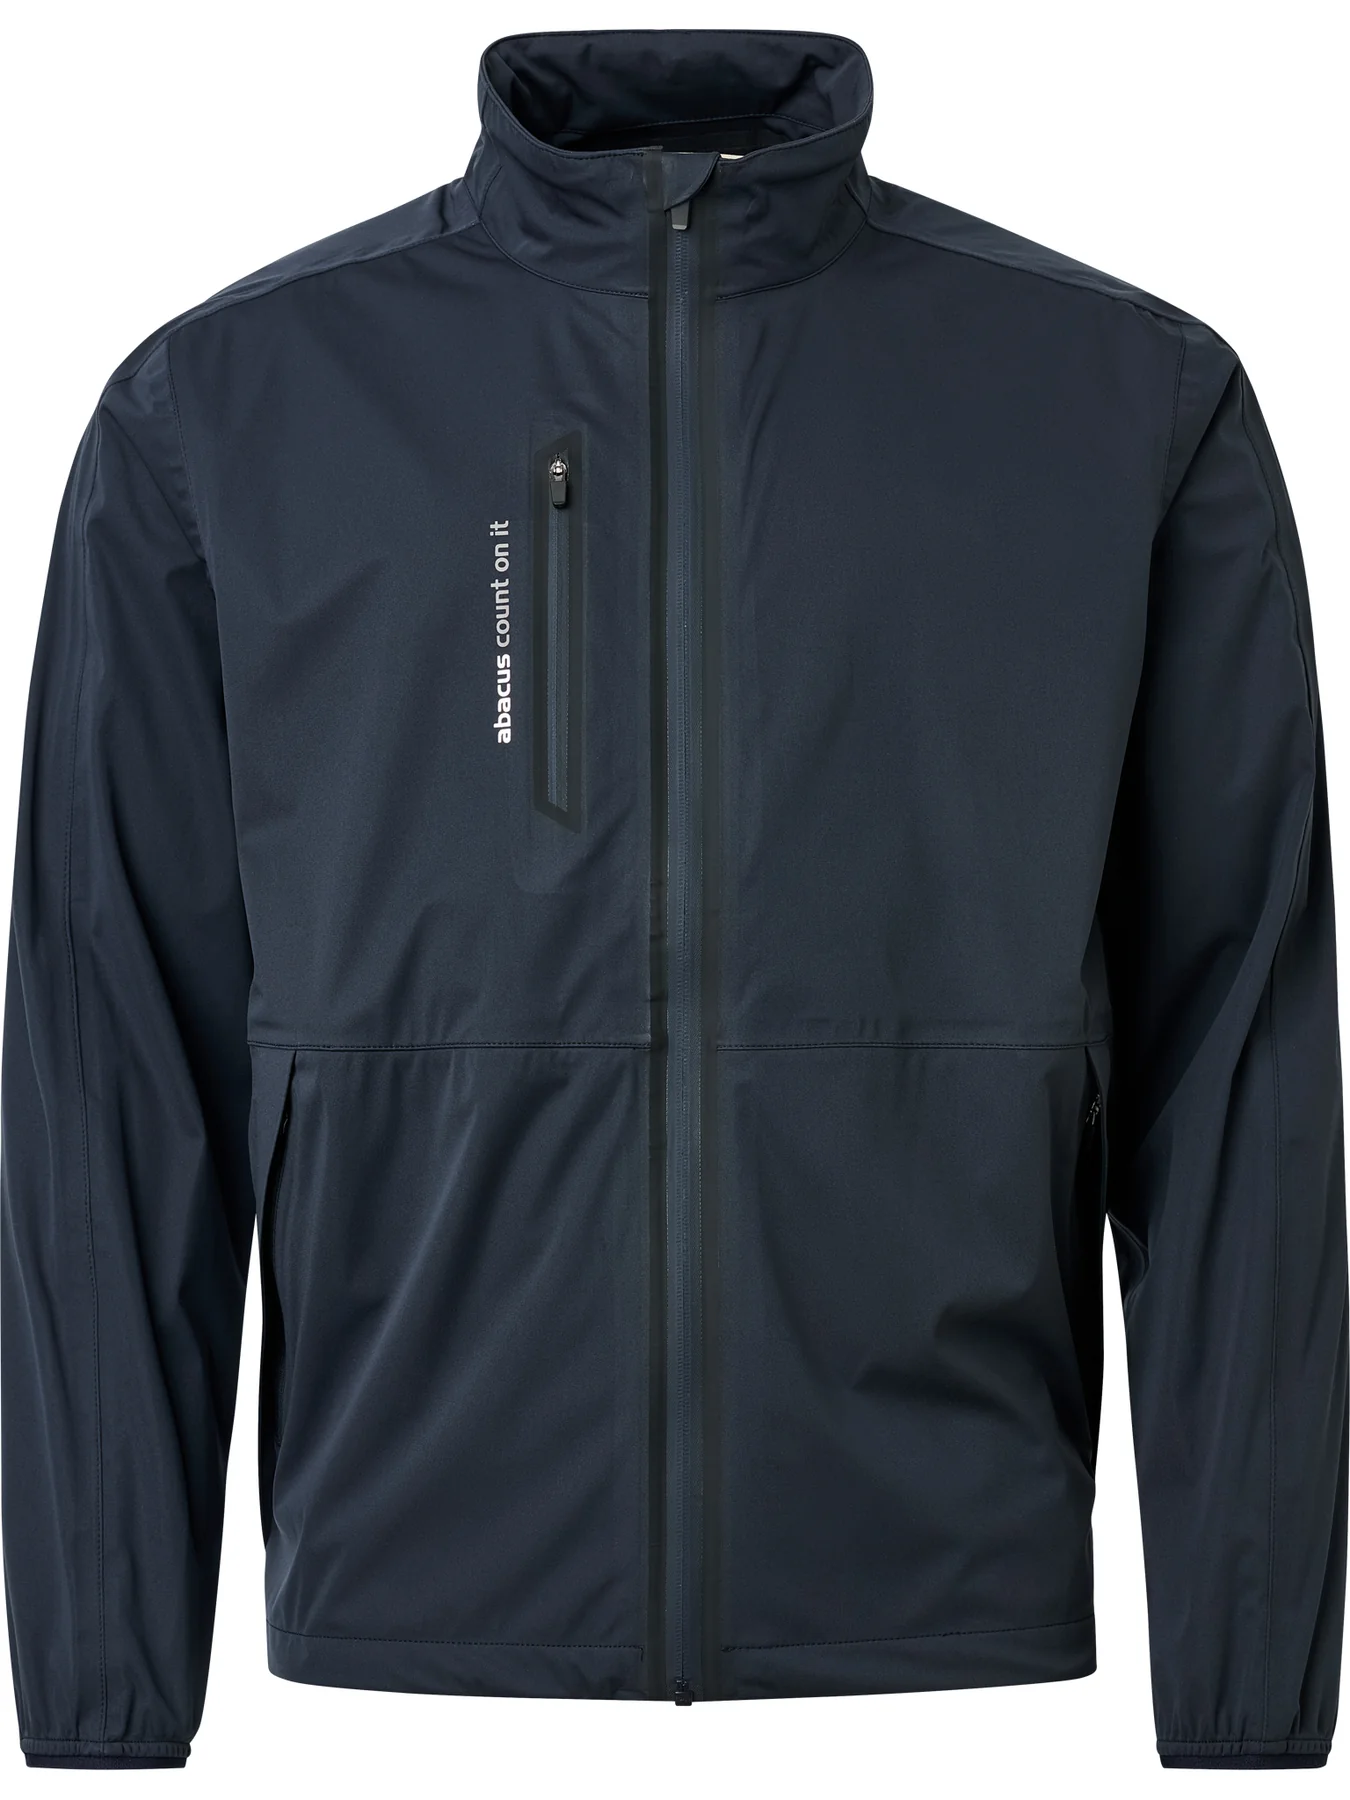 Abacus | 6080 | Bounce Stretch Rainjacket Mens | Navy | Frontview